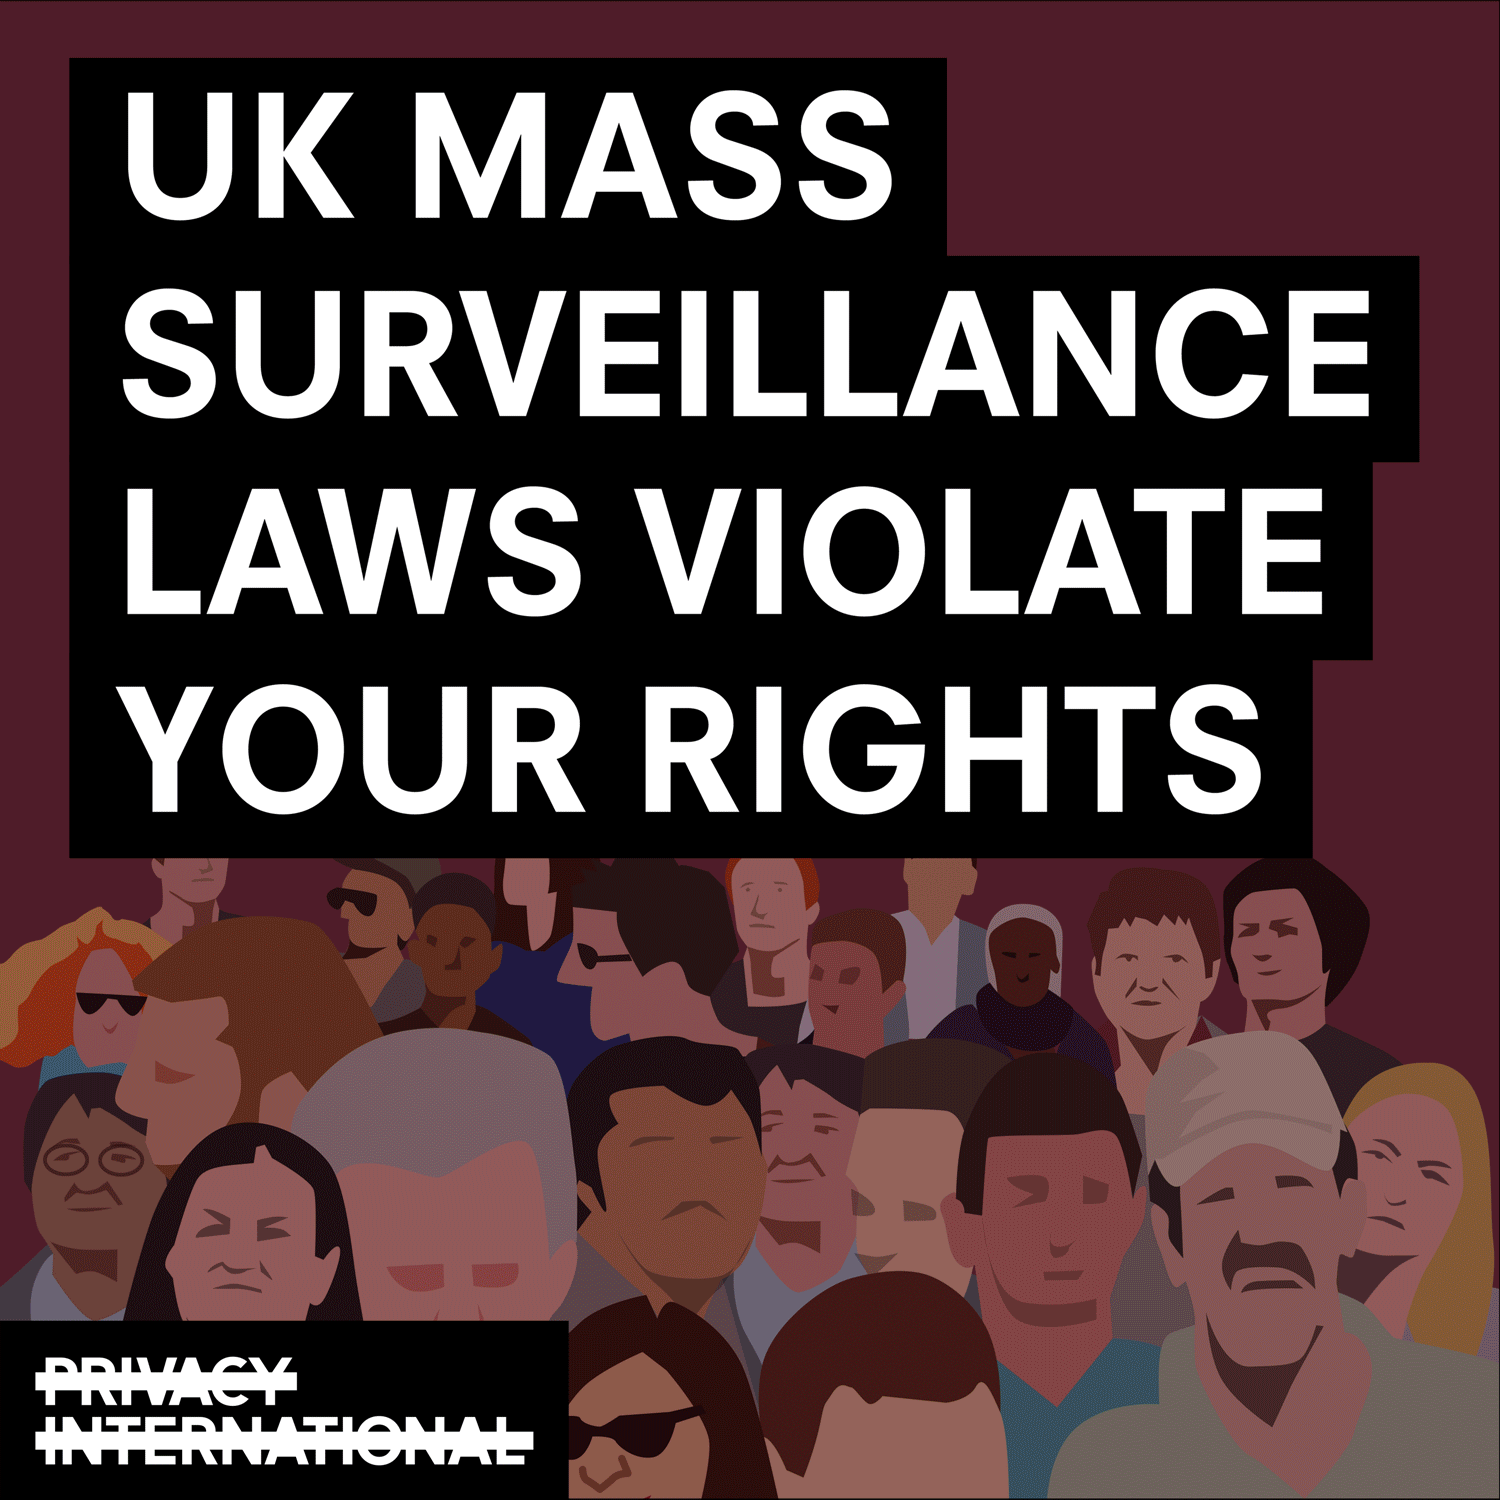 Q&A: European Court of Human Rights Rules UK Mass Surveillance Laws Violate Rights 